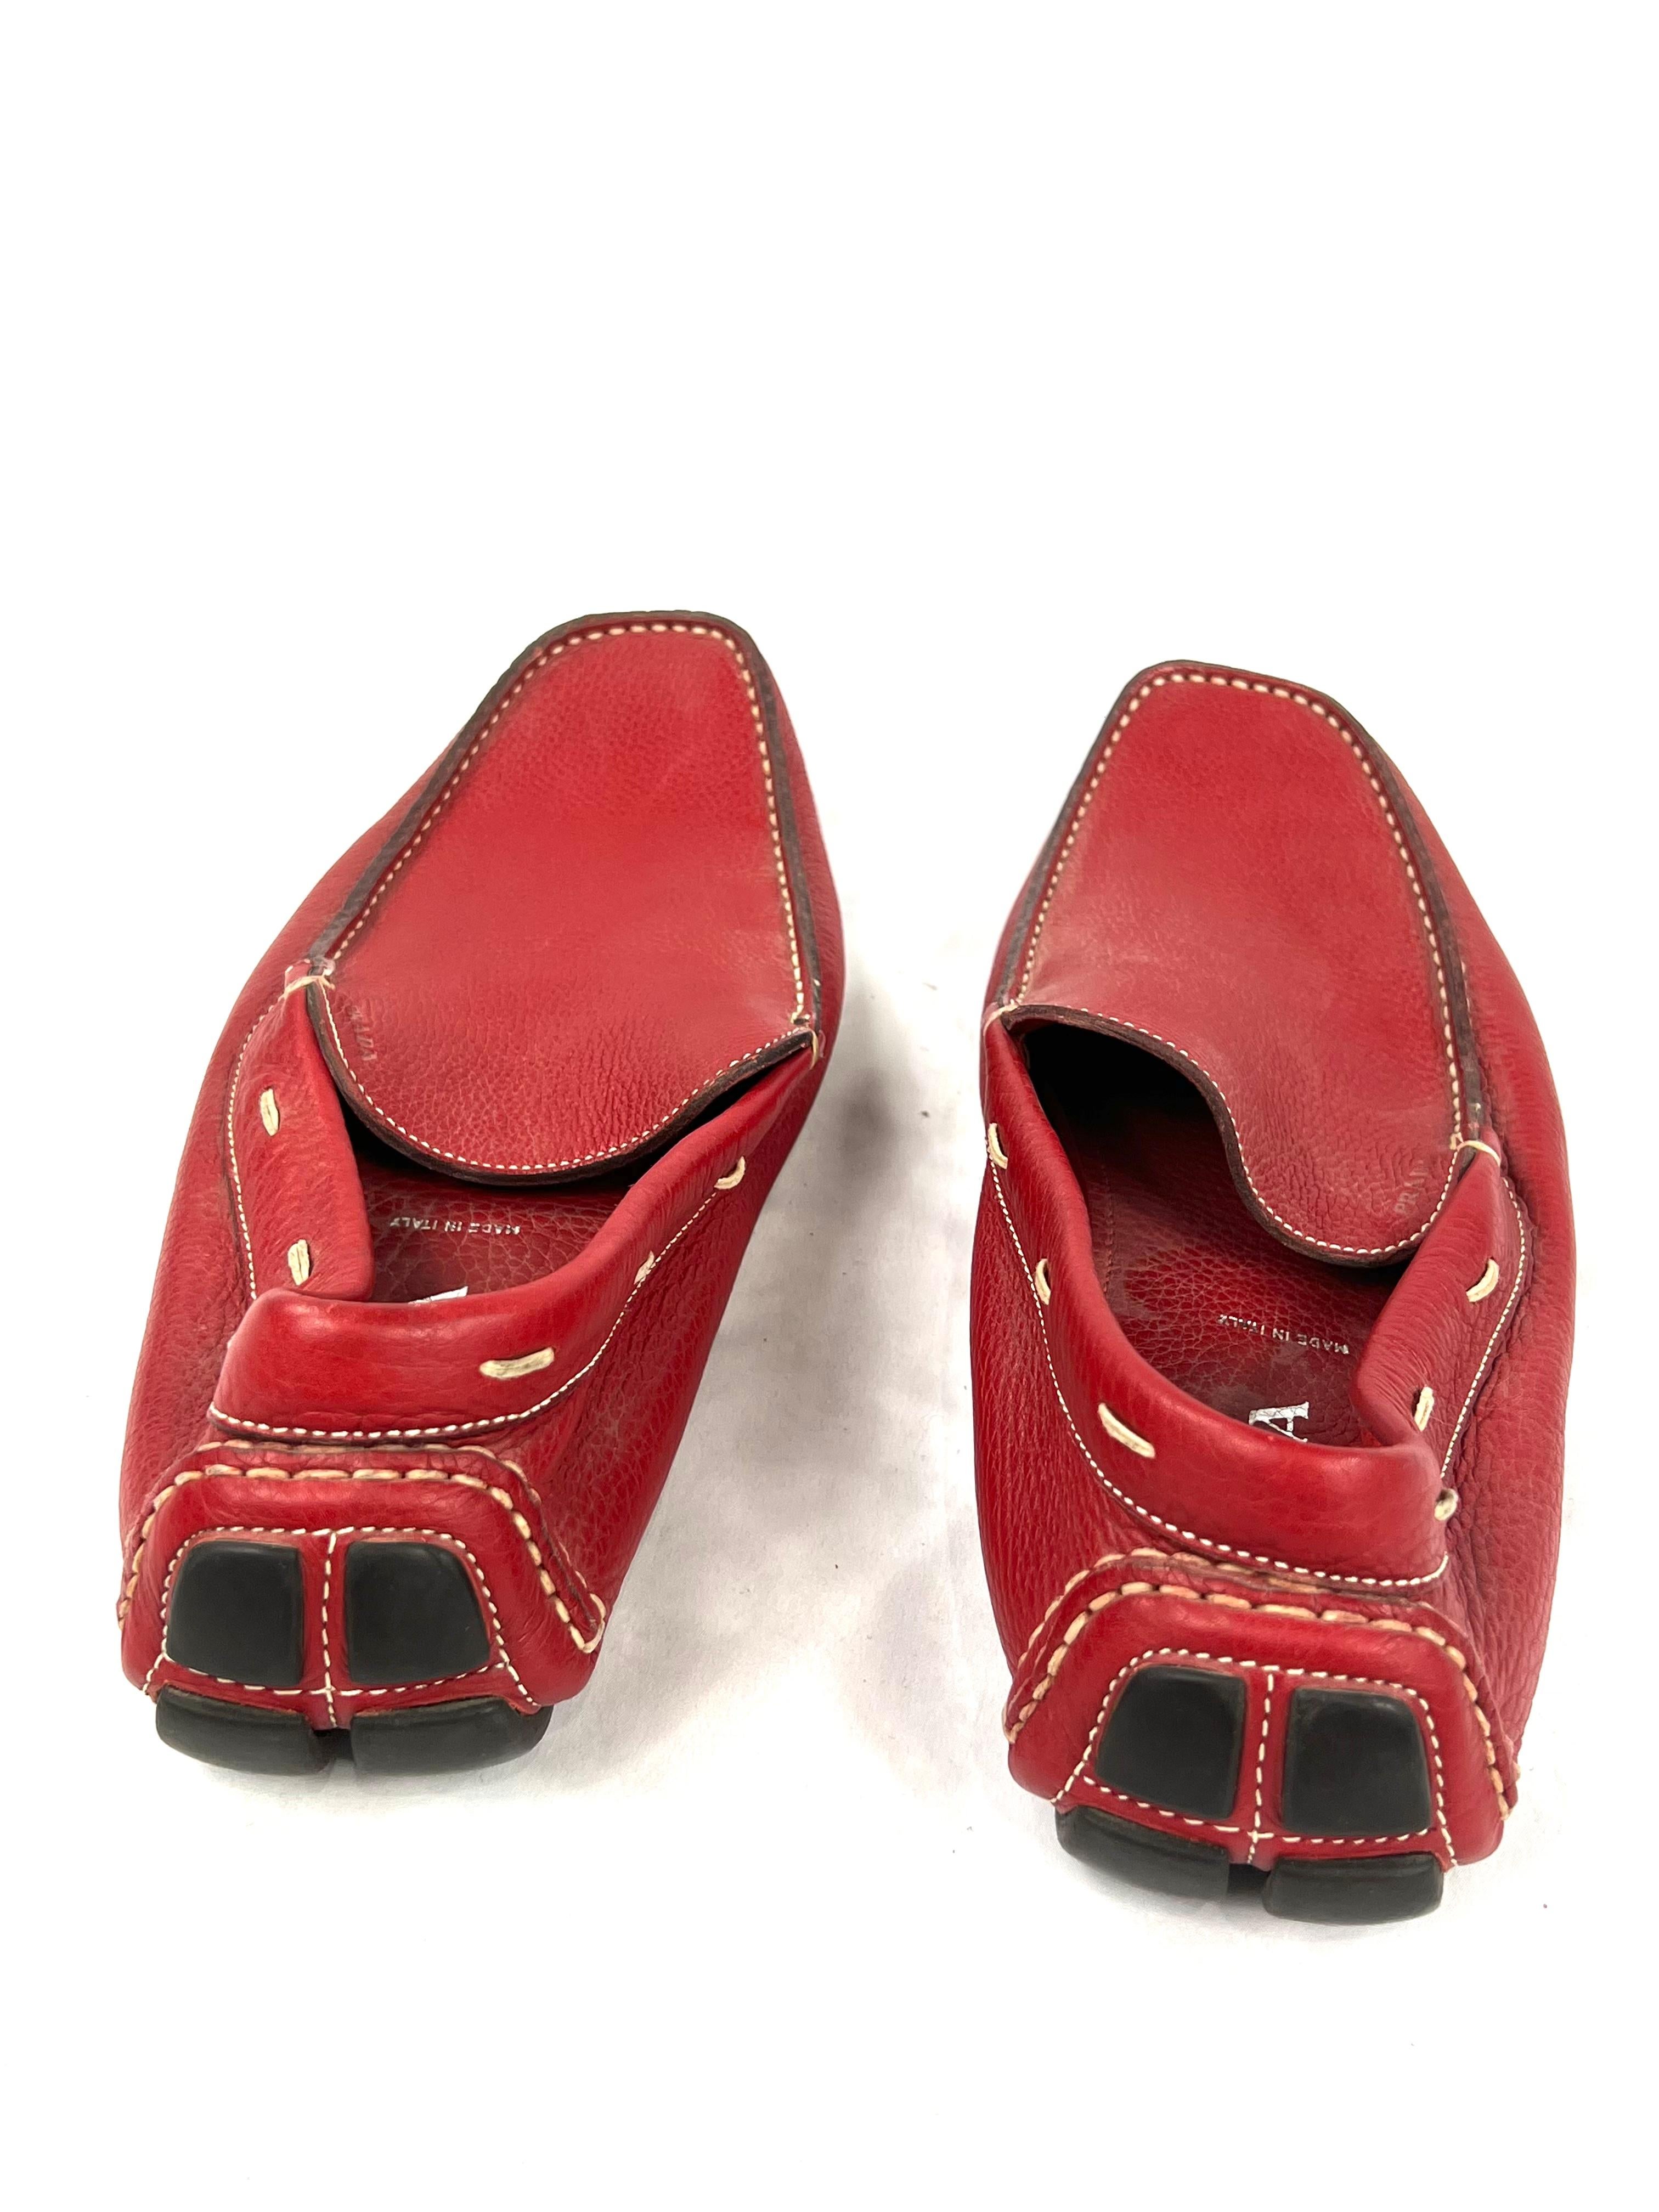 Prada Red Leather Moccasins Flat Shoes, Size 10 In Excellent Condition For Sale In Beverly Hills, CA